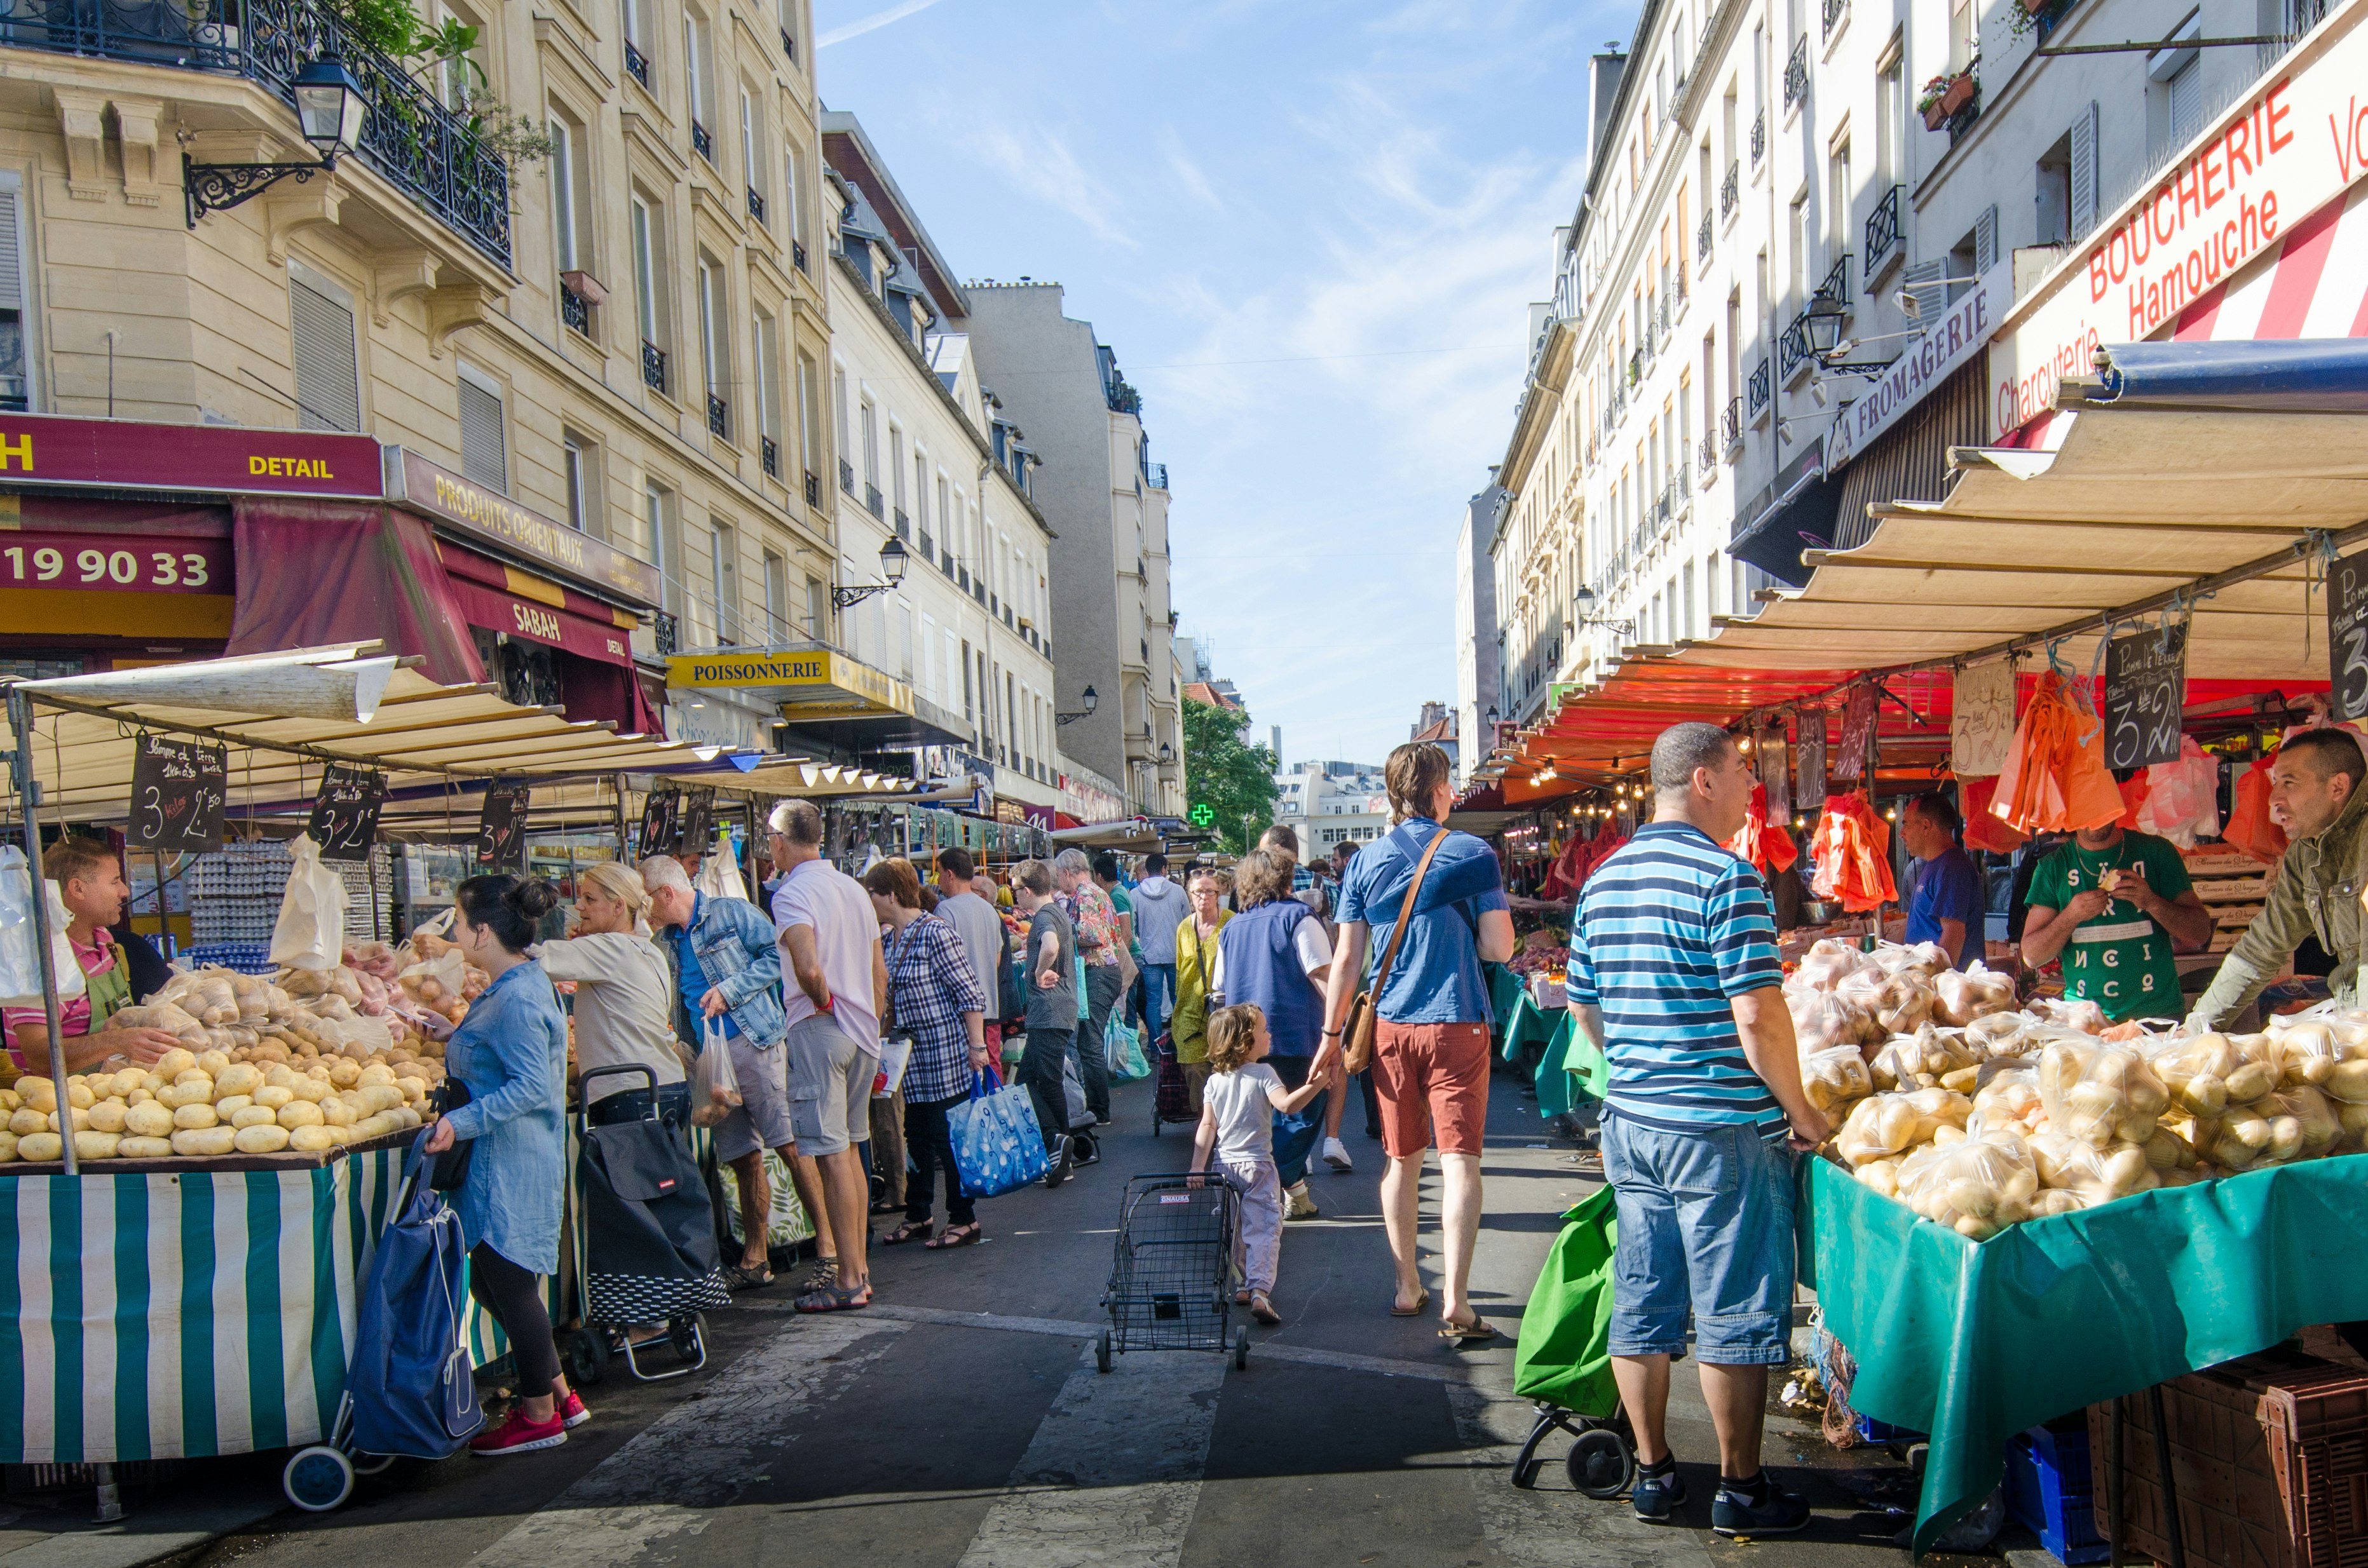 Crowds of people browse the stalls of Marché Bastille in Paris. The market stalls run down either side of a long avenue.